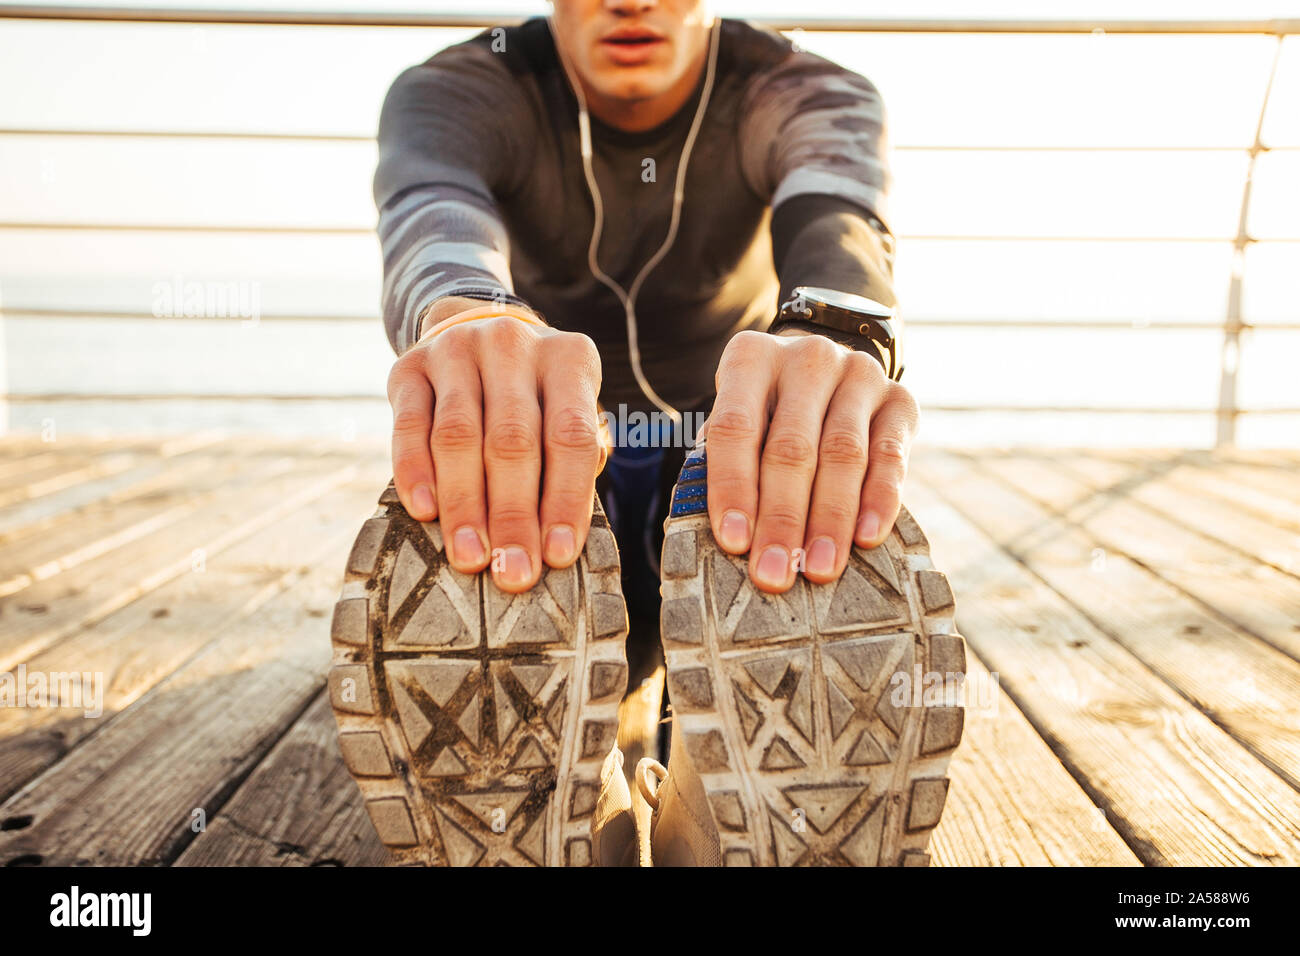 Fit handsome man  warming up in preparation for a workout run. Stock Photo